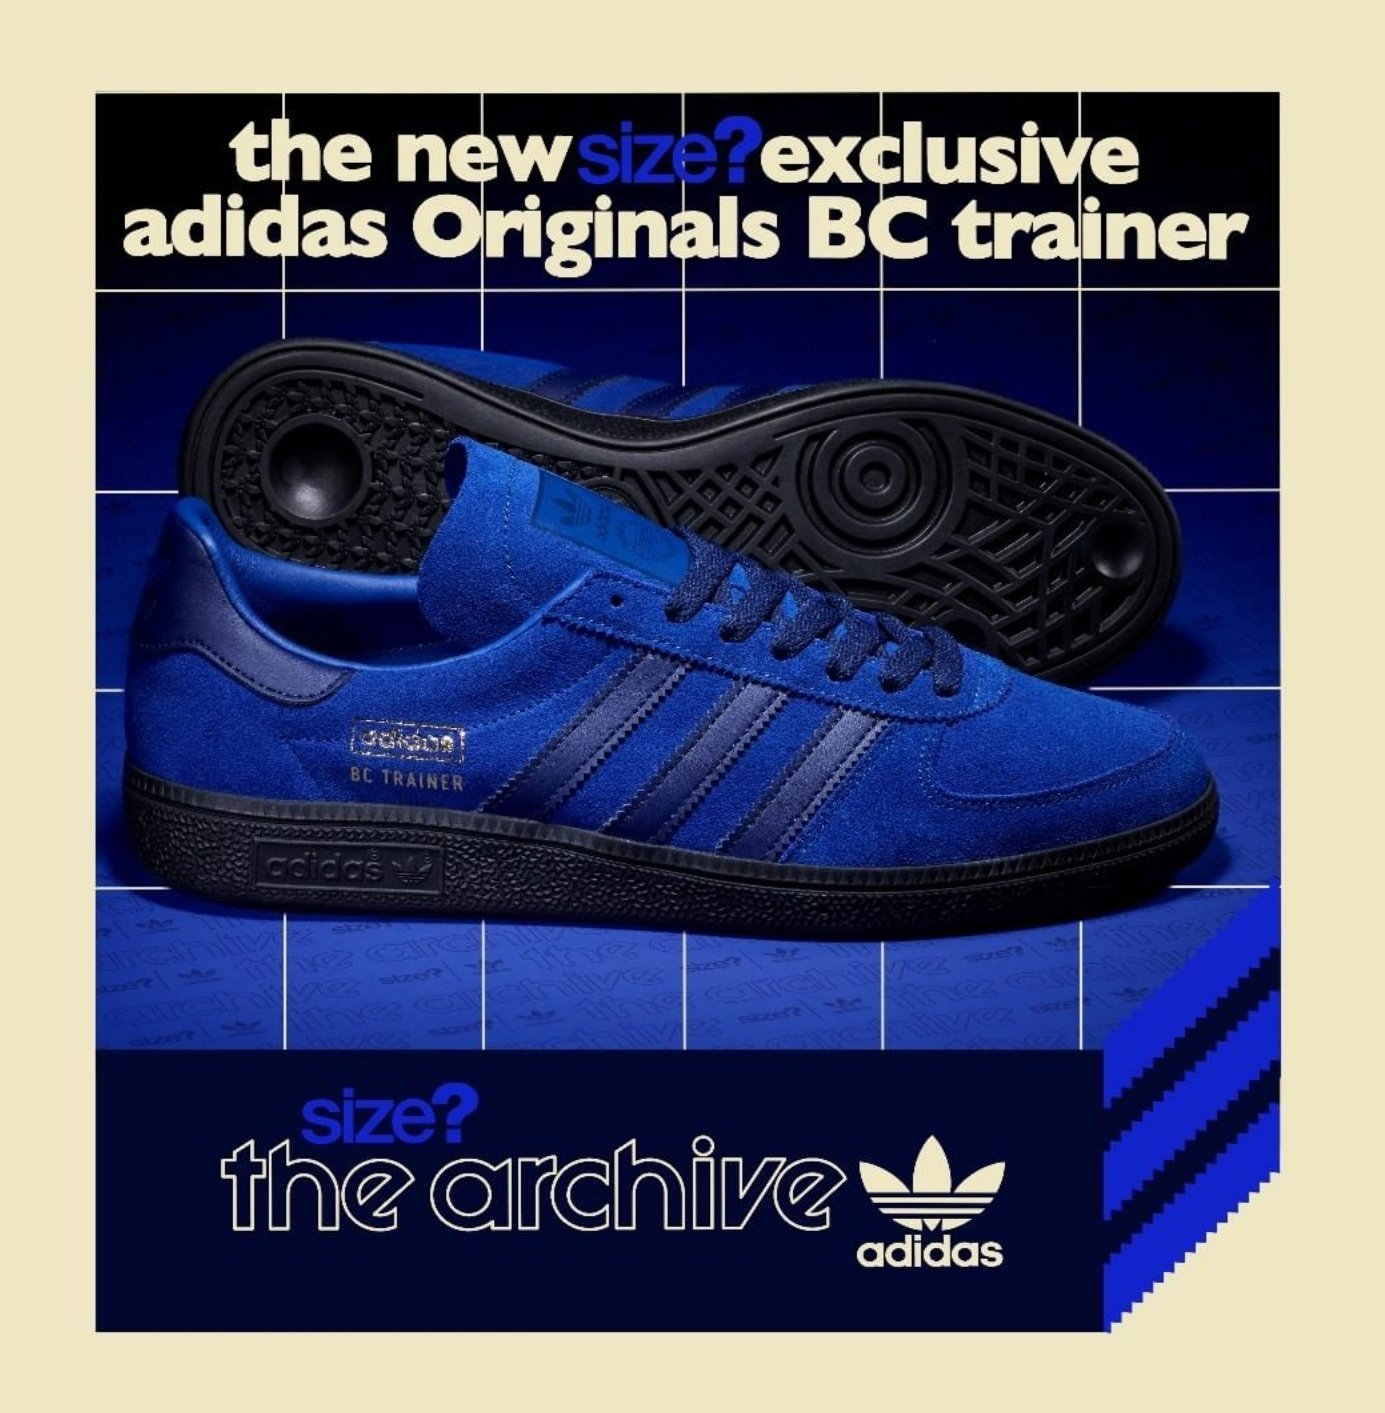 cuatro veces Controversia Miau miau Man Savings on Twitter: "Coming soon .... adidas BC 'Baltic Cup' Trainer  exclusive to Size? Release date - to be confirmed https://t.co/fdestETHc8"  / Twitter